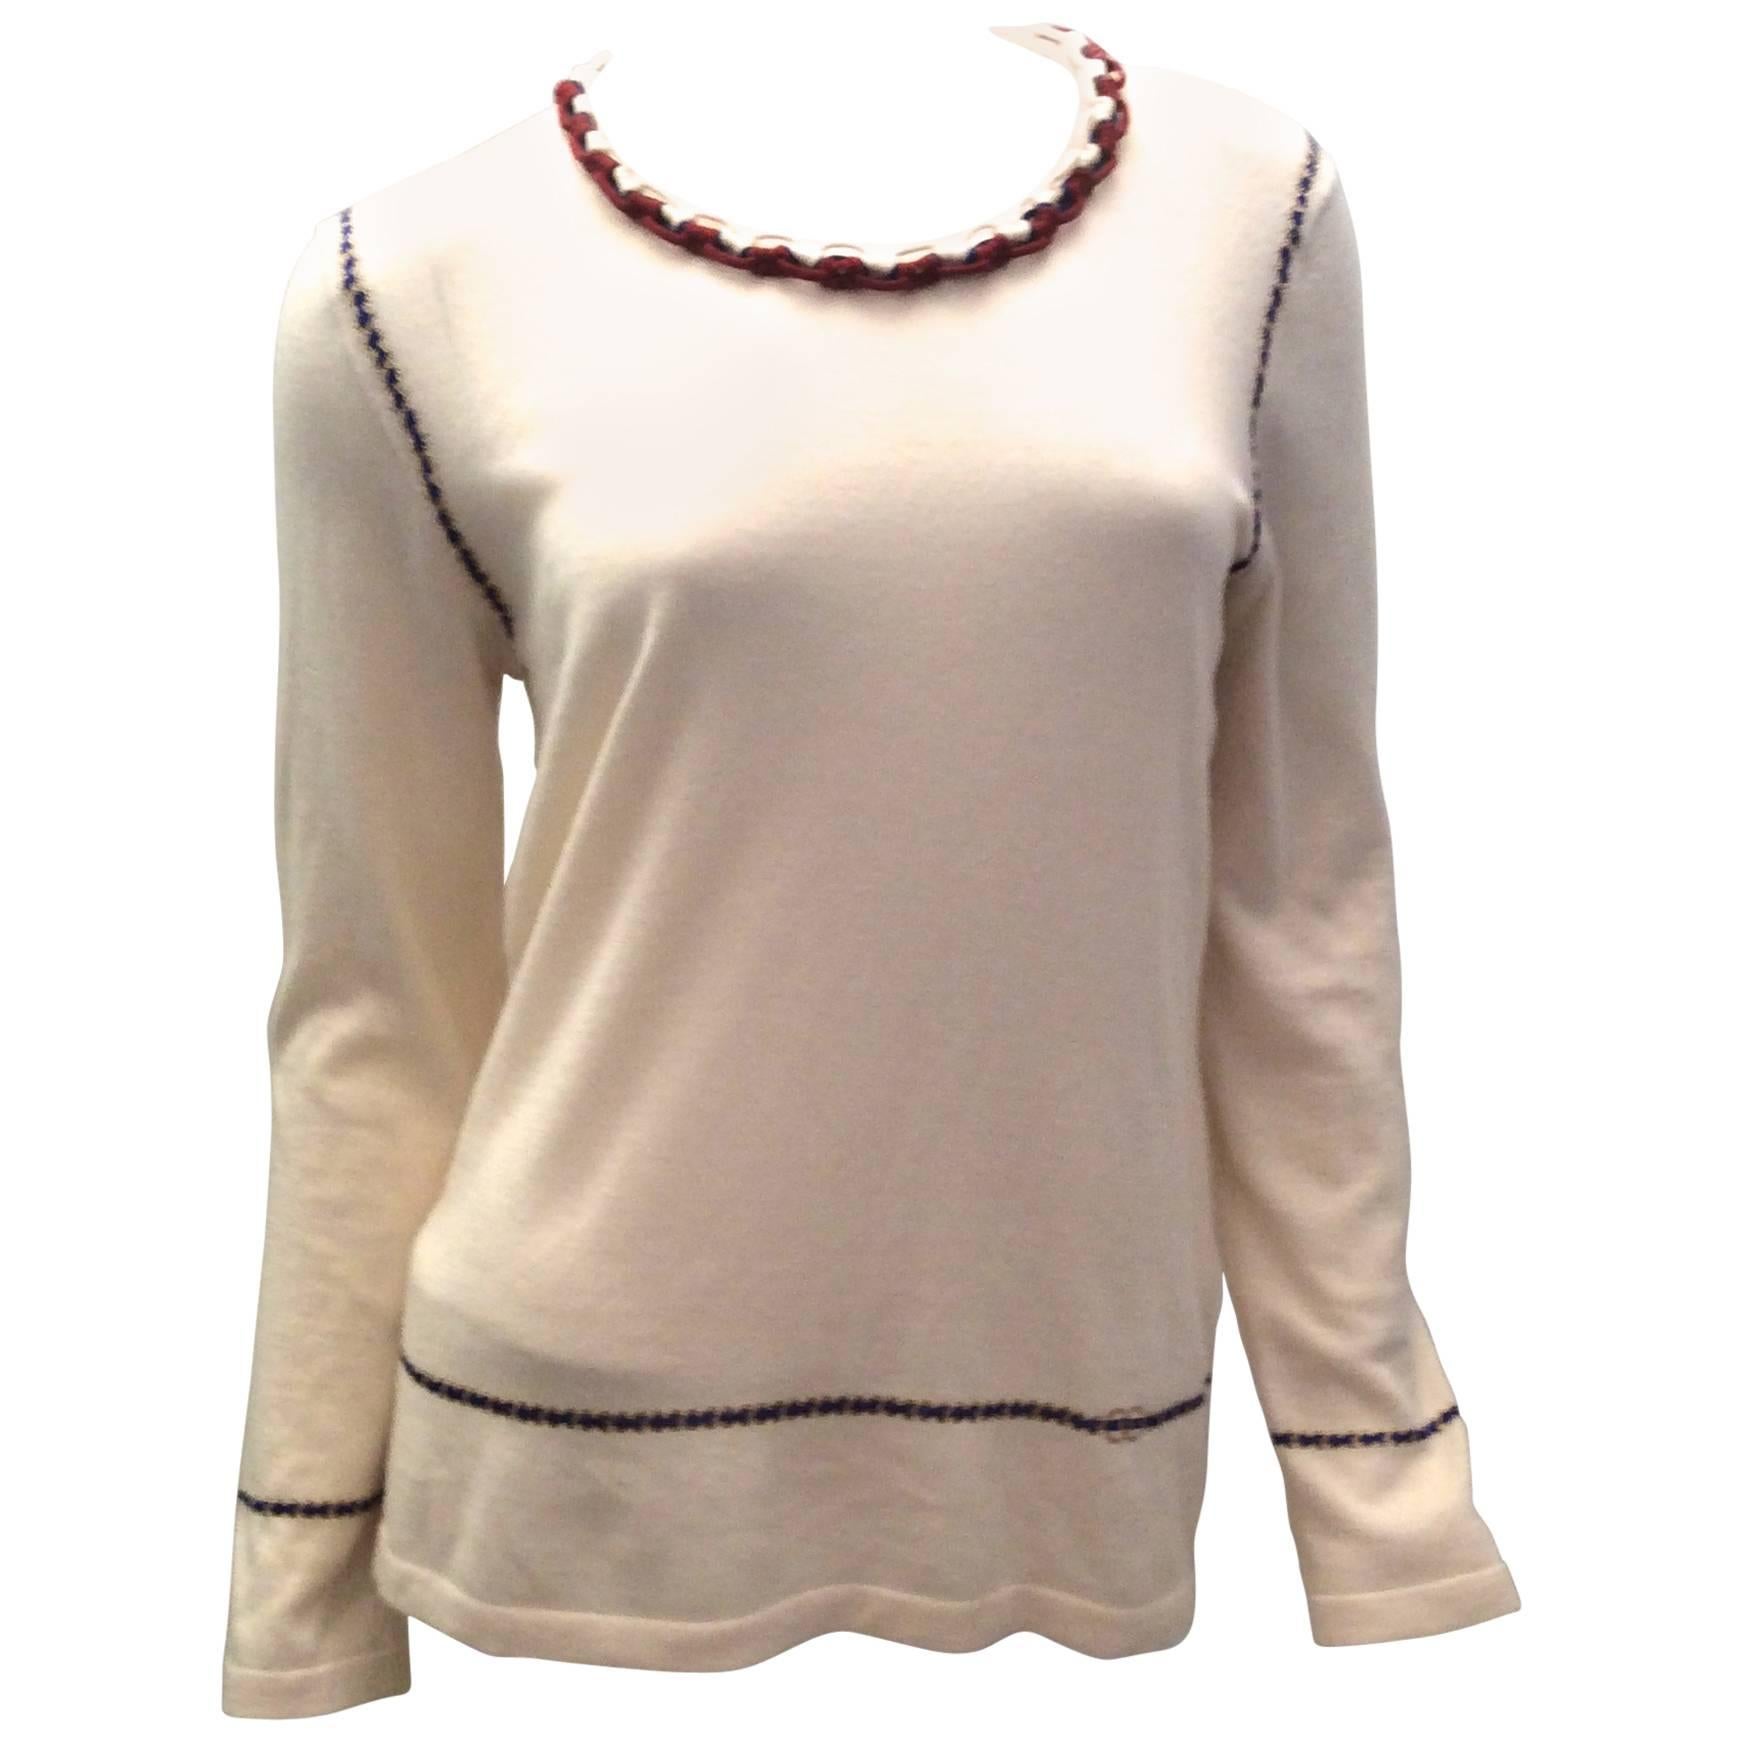 Vintage Chanel Cashmere Sweater - Size Small For Sale